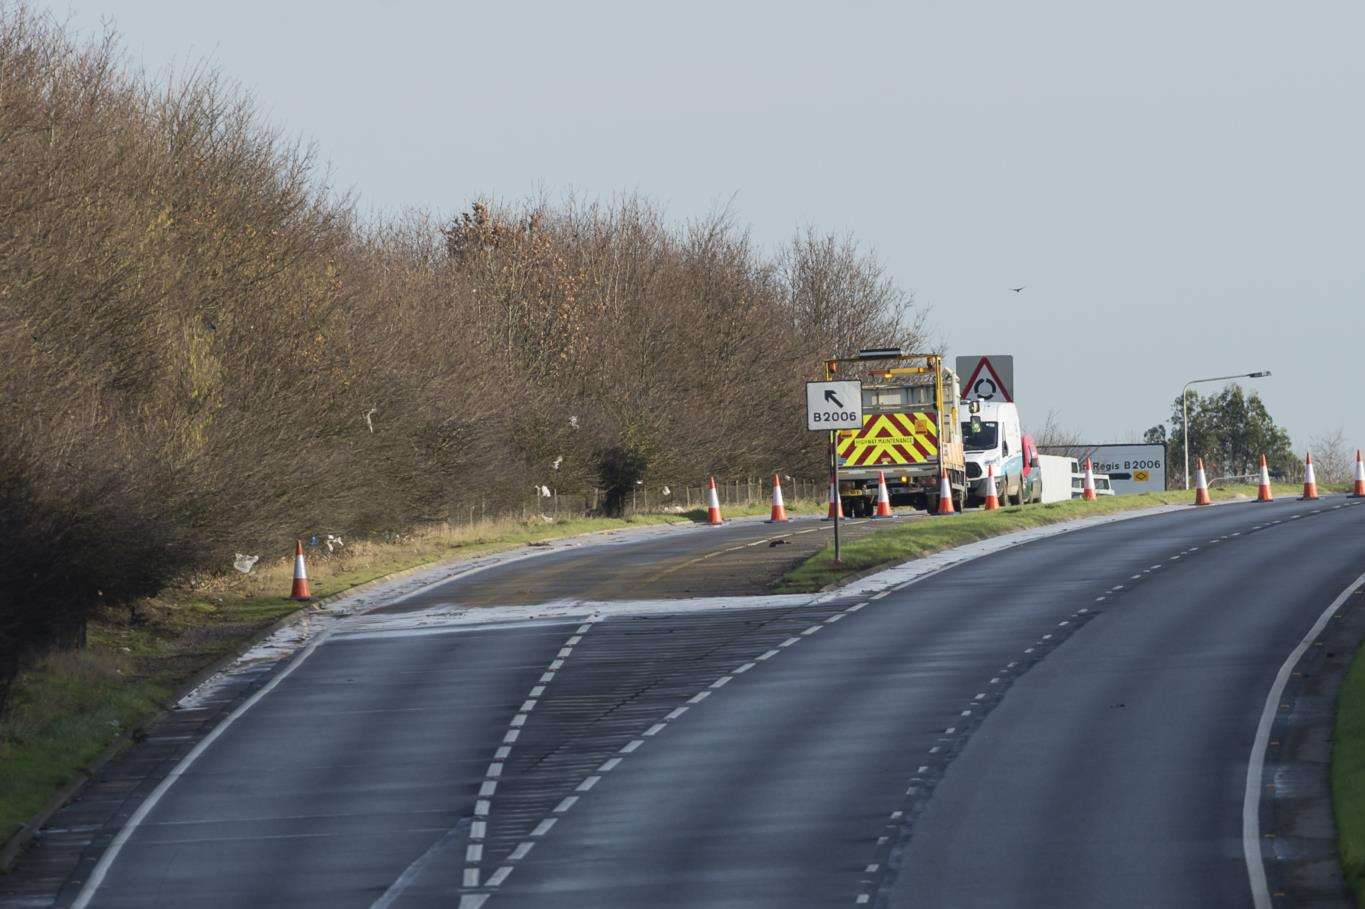 Work being carried out on the A249